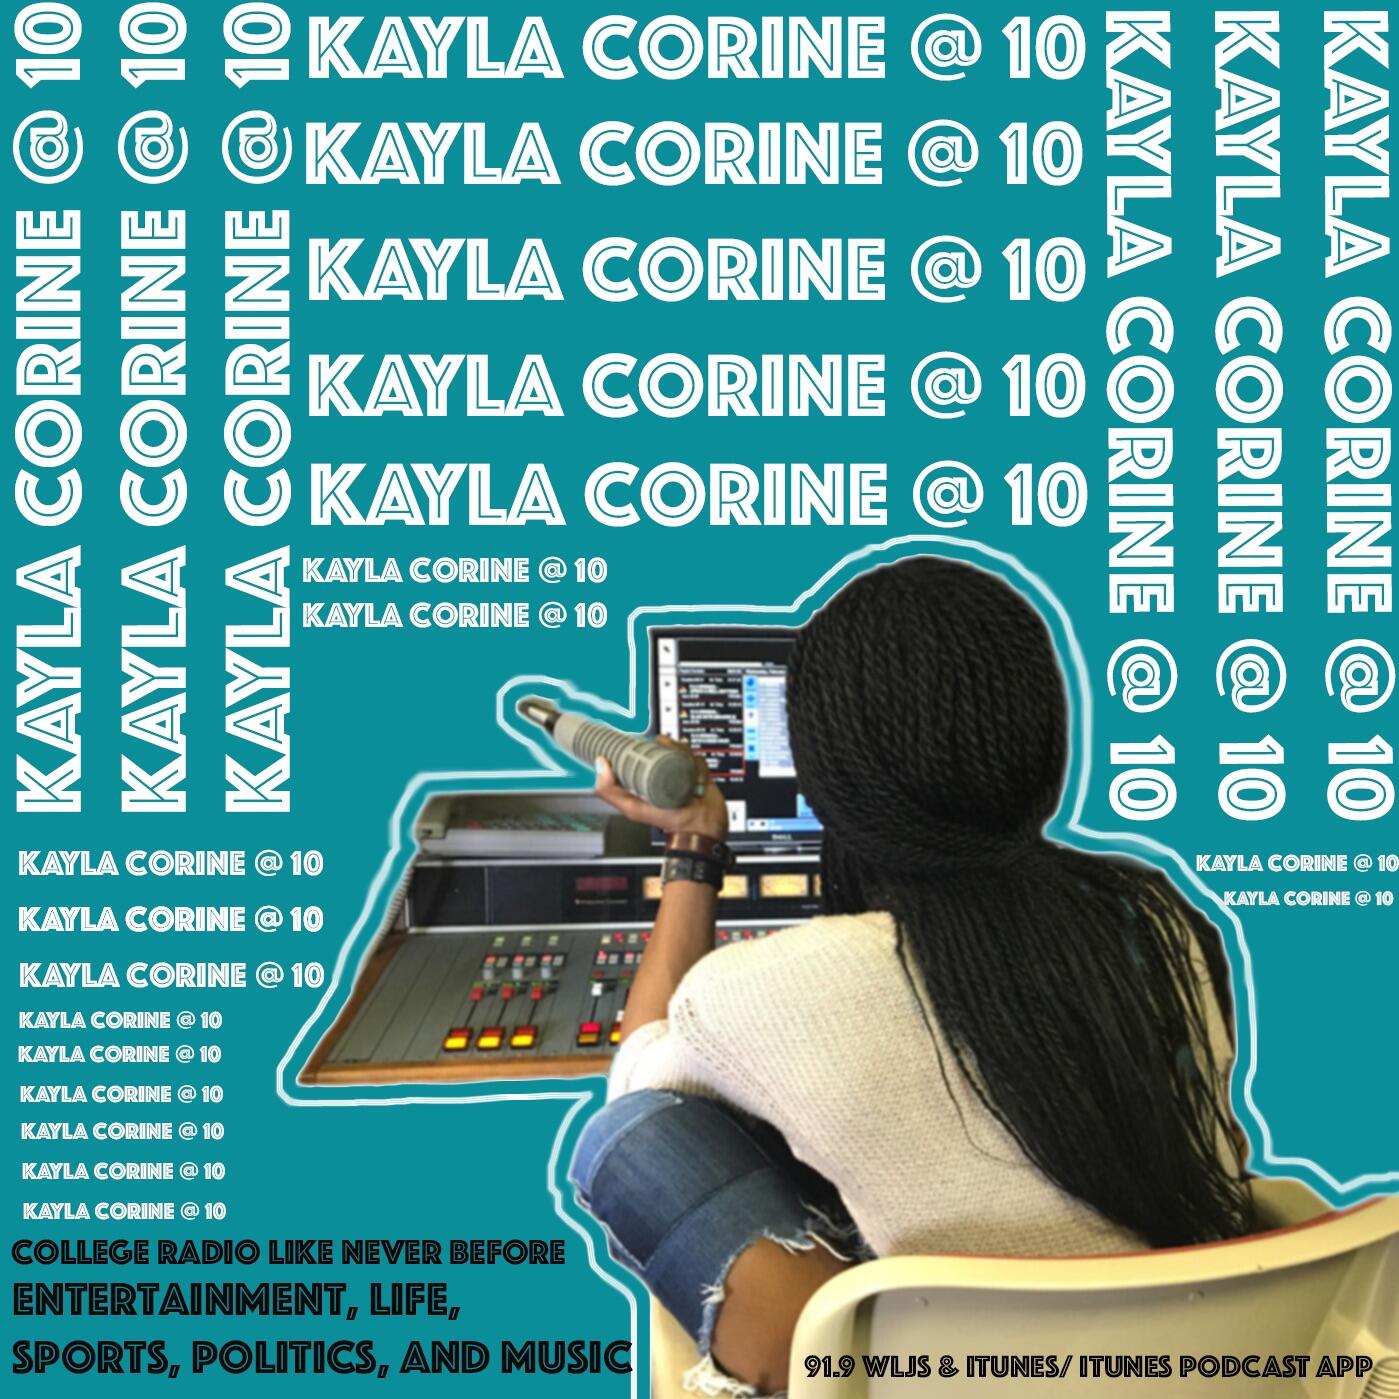 Listen Free To Kayla Corine At 10 On Iheartradio Podcasts